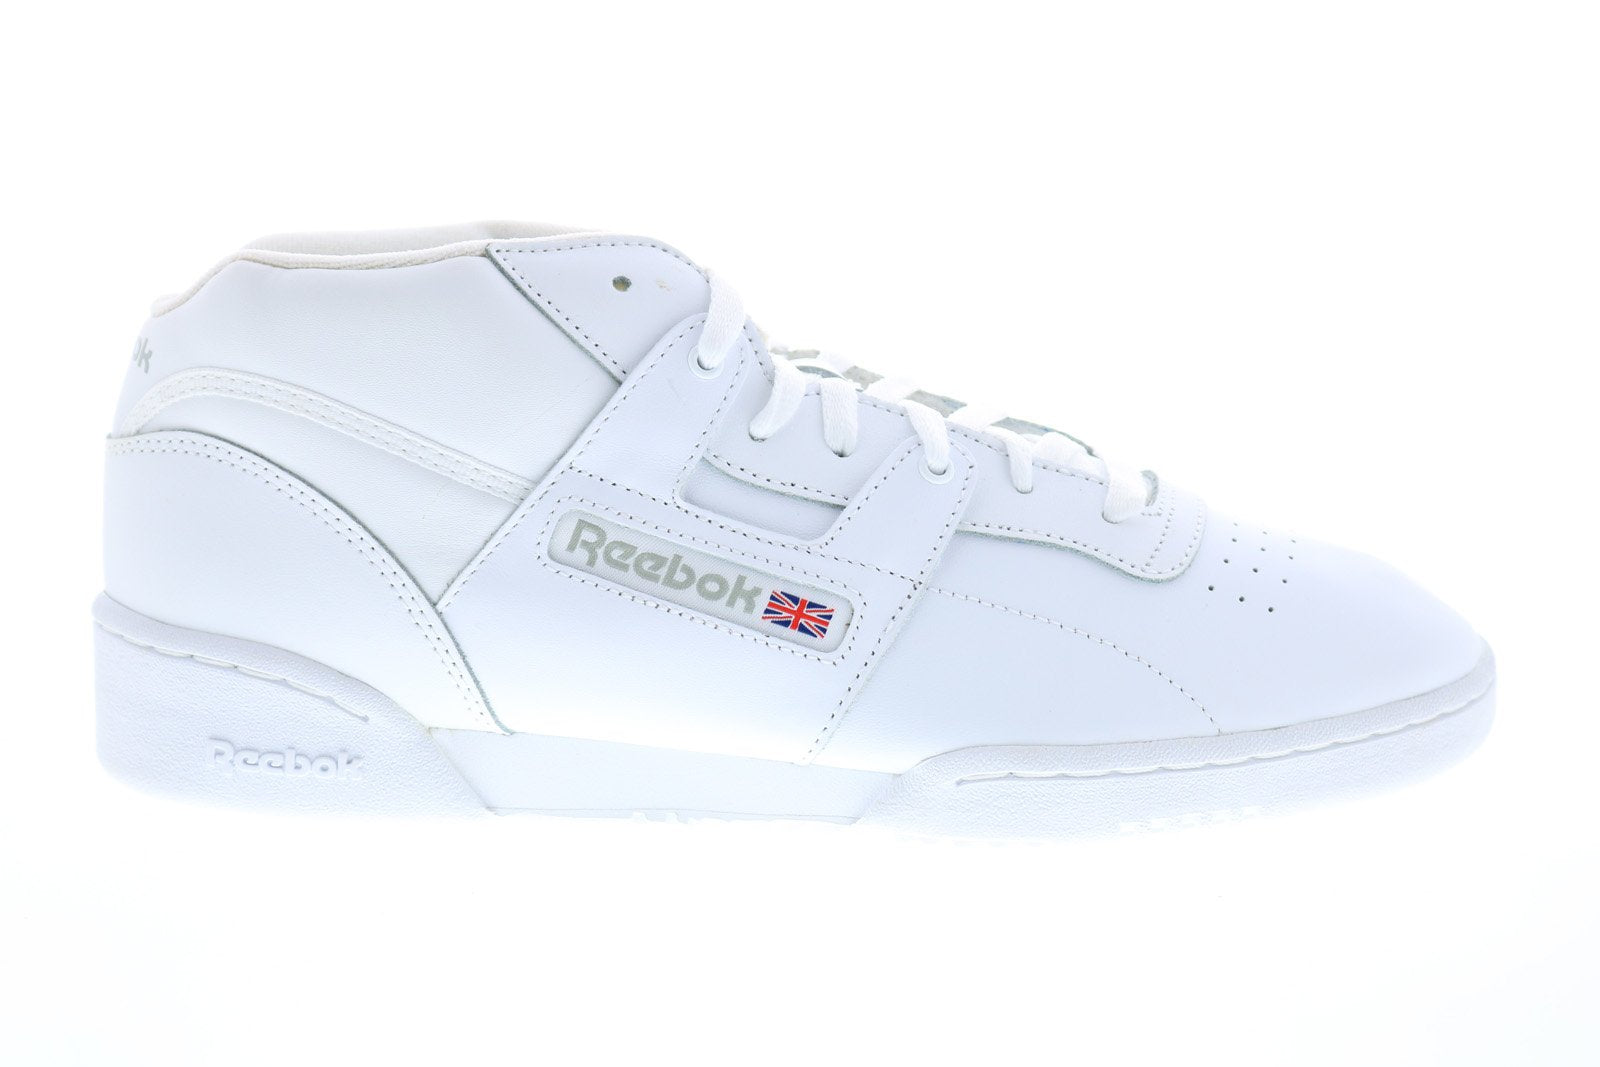 Metafor mover Fryse Reebok Workout Mid DV4576 Mens White Lace Up Lifestyle Sneakers Shoes -  Ruze Shoes